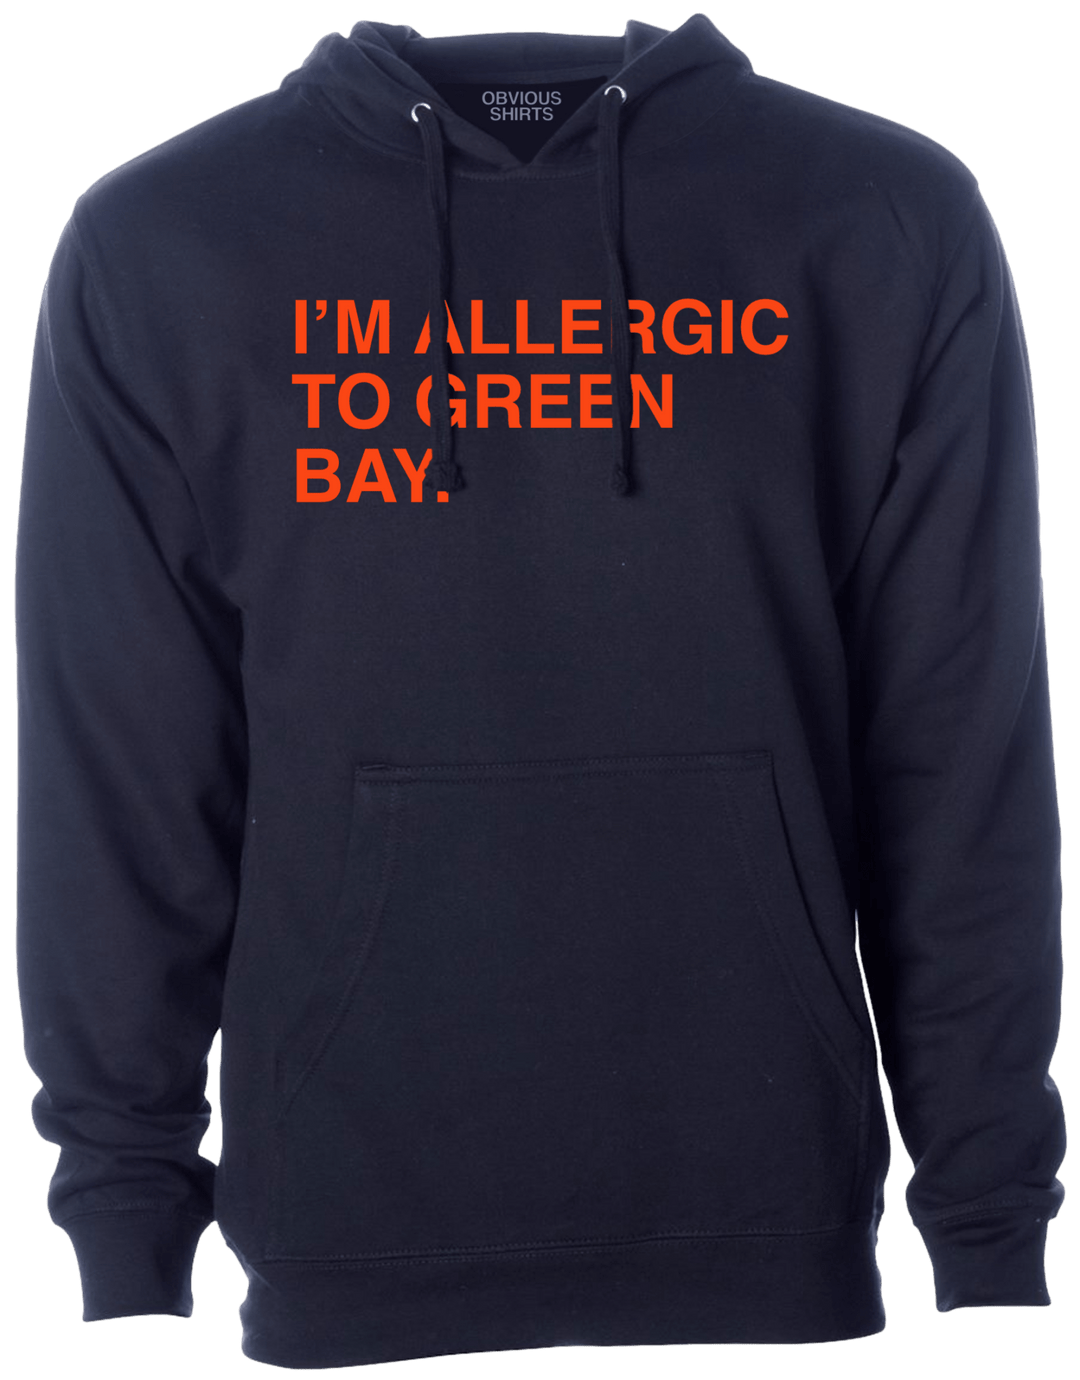 I'M ALLERGIC TO GREEN BAY. (HOODED SWEATSHIRT) - OBVIOUS SHIRTS